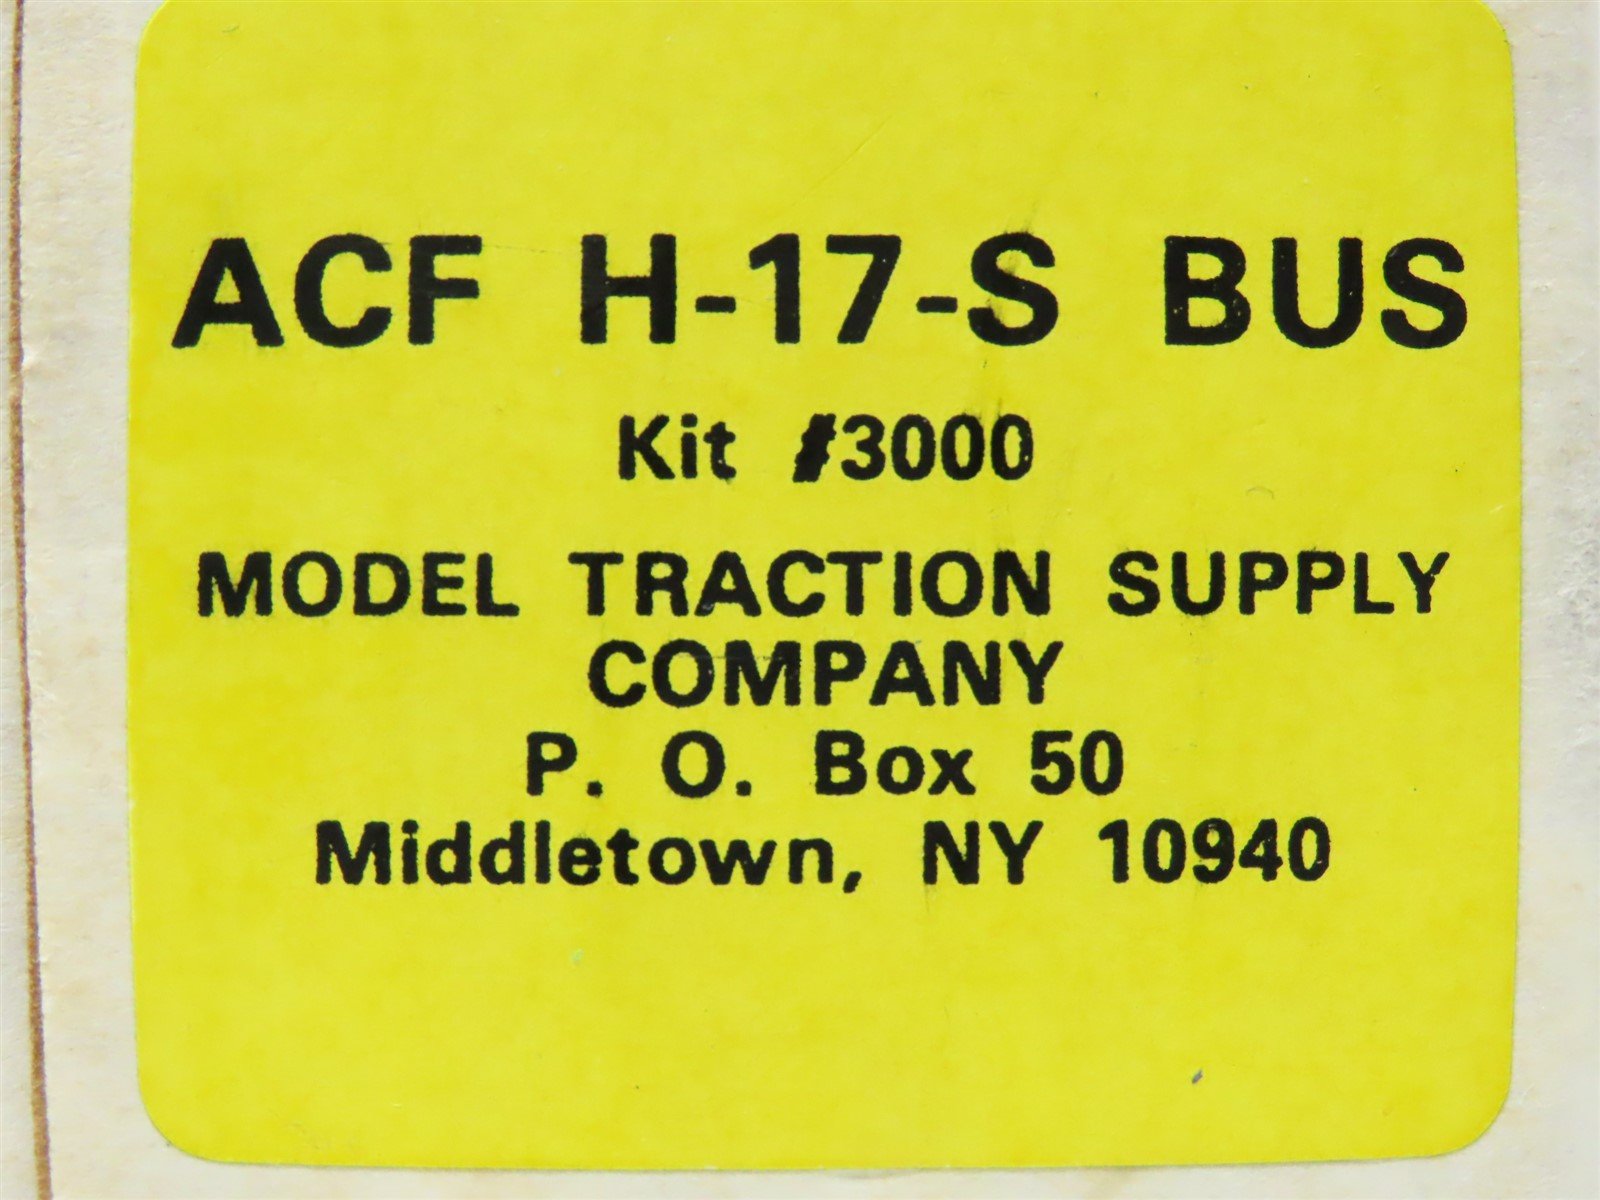 Model Traction Supply Company "Roadway Division" Die-Cast Kit #ACF H-17-S Bus